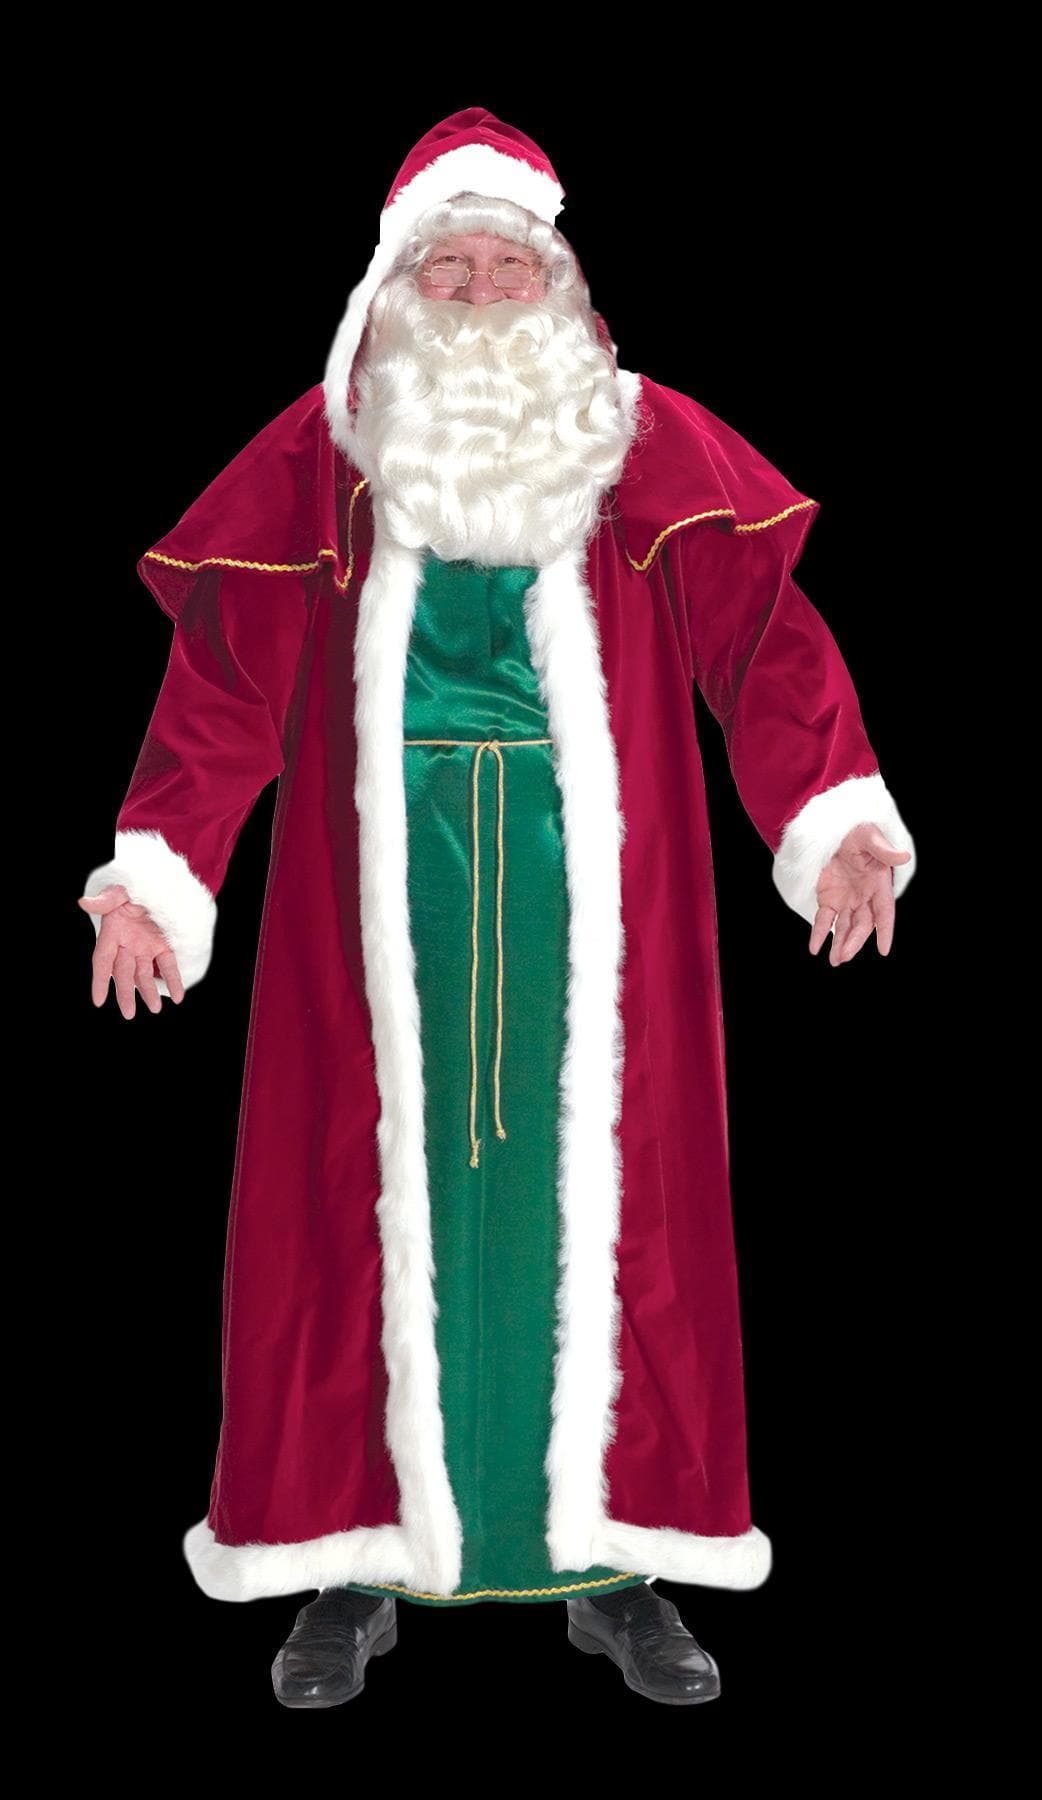 "Santa Suit - Old-Fashioned Victorian" Christmas Costume